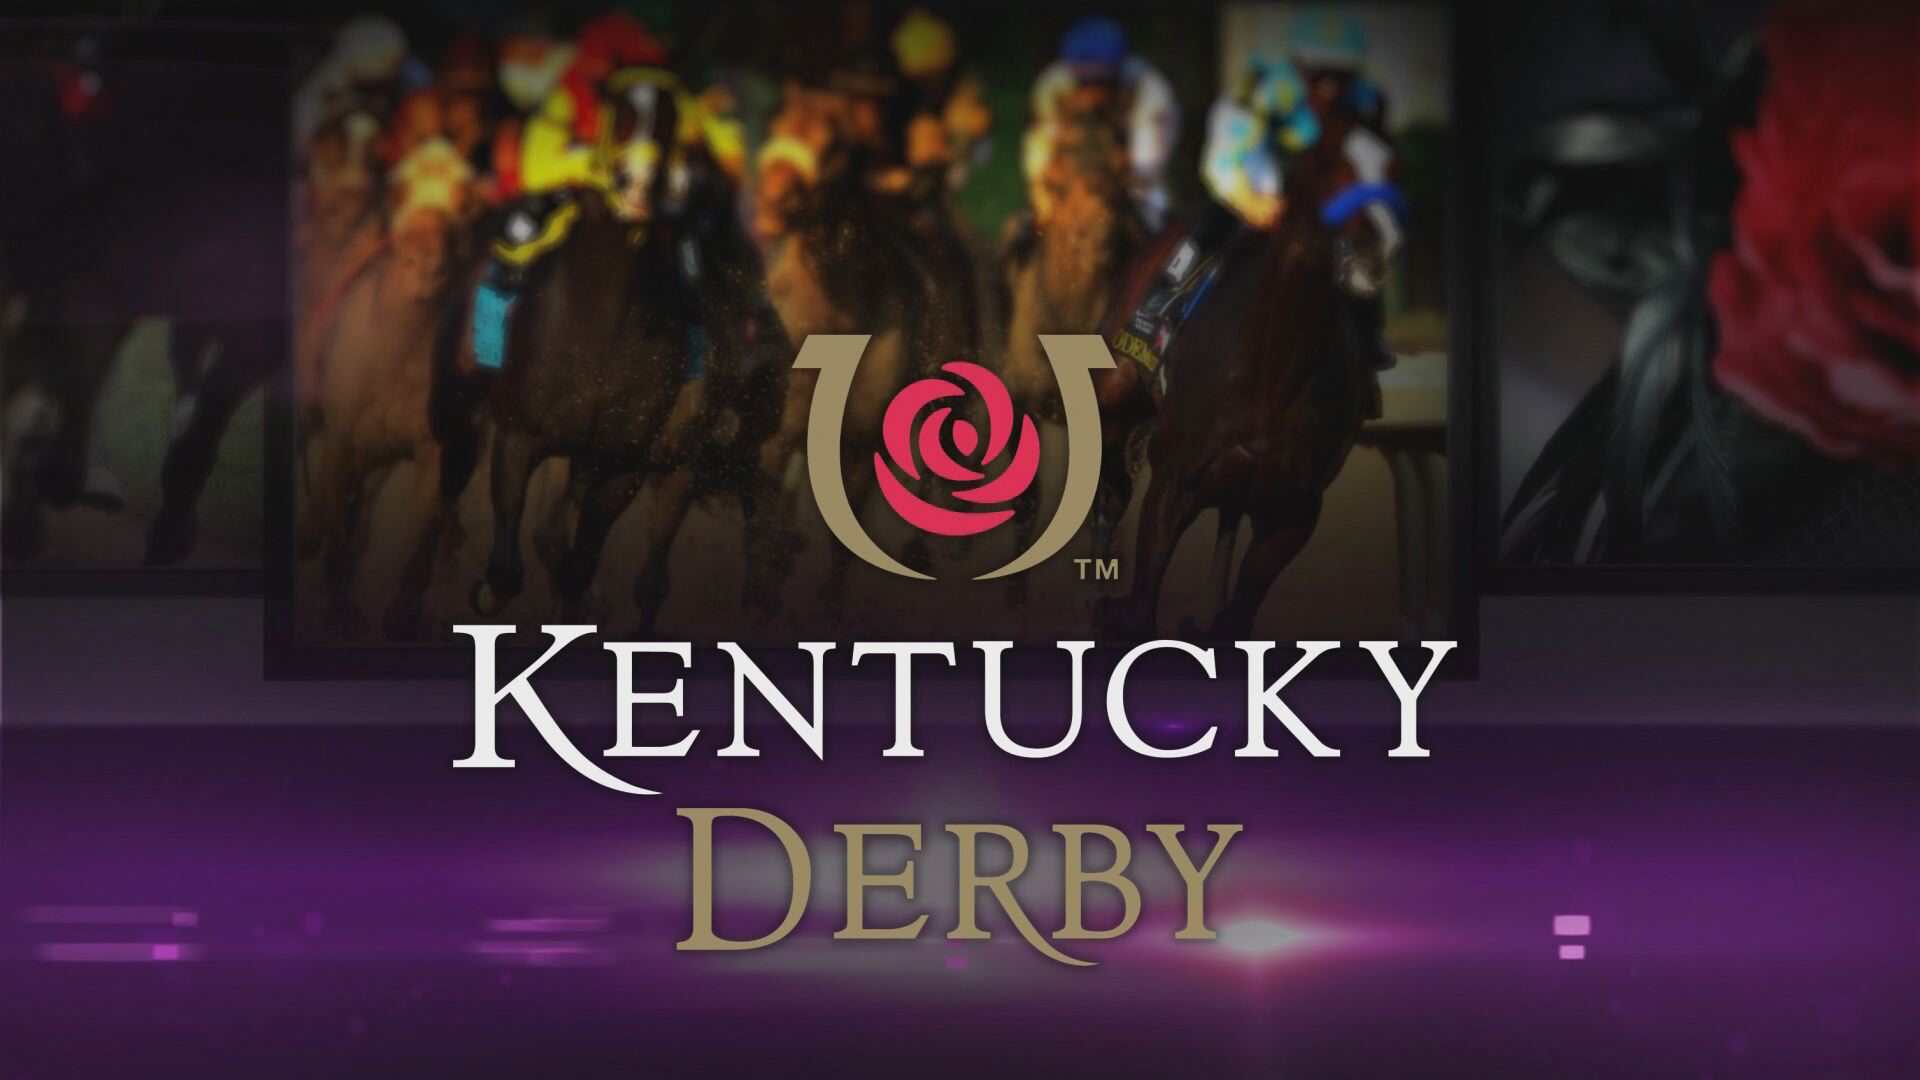 Get your Kentucky Derby horse name 9NEWS at 4 pm 42914